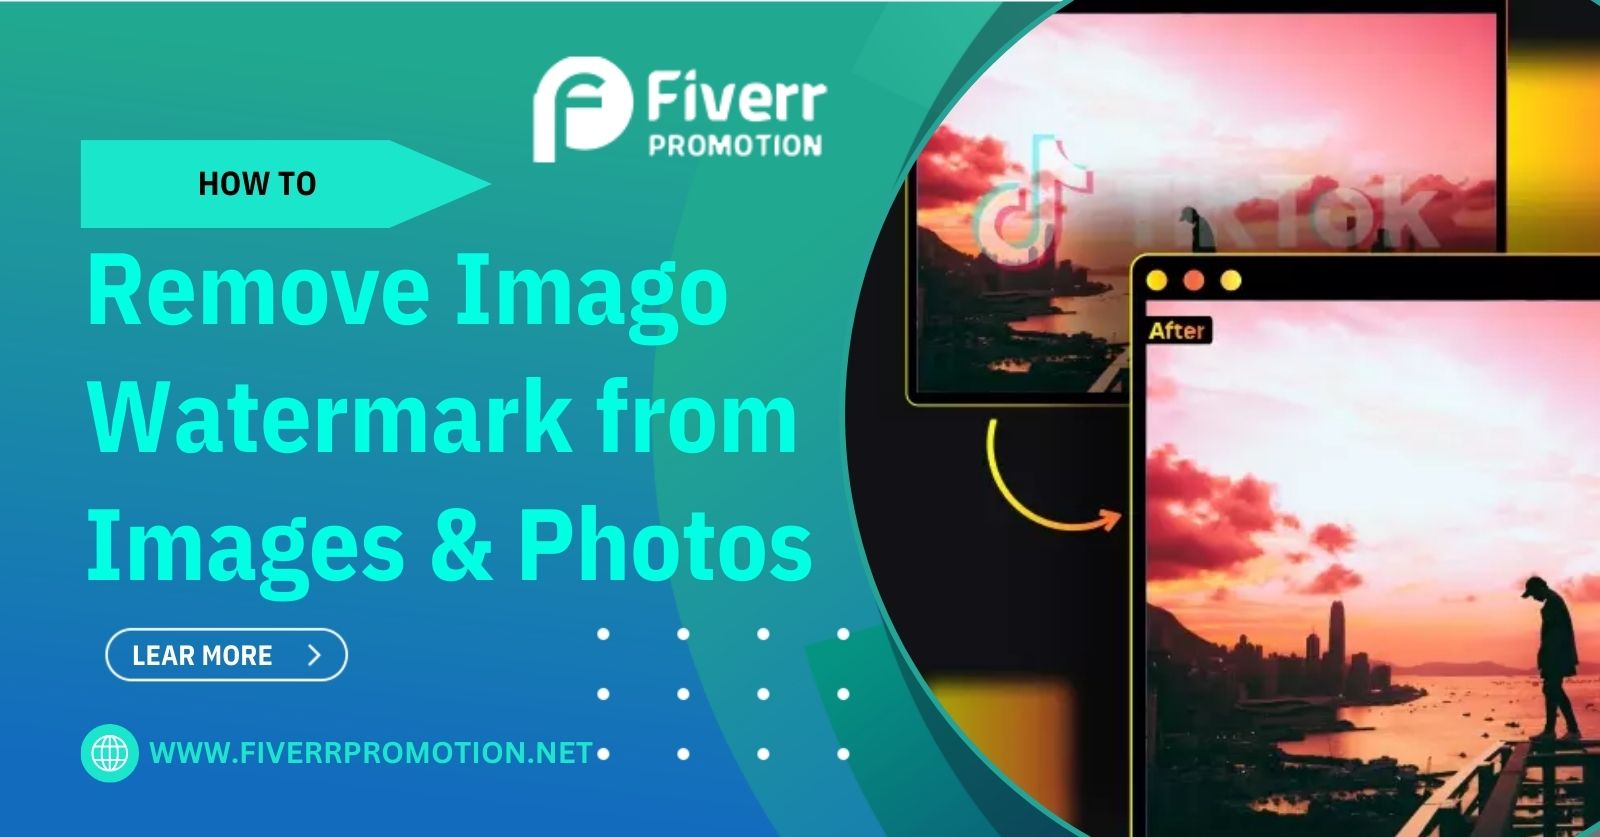 How to Remove Imago Watermark from Images & Photos